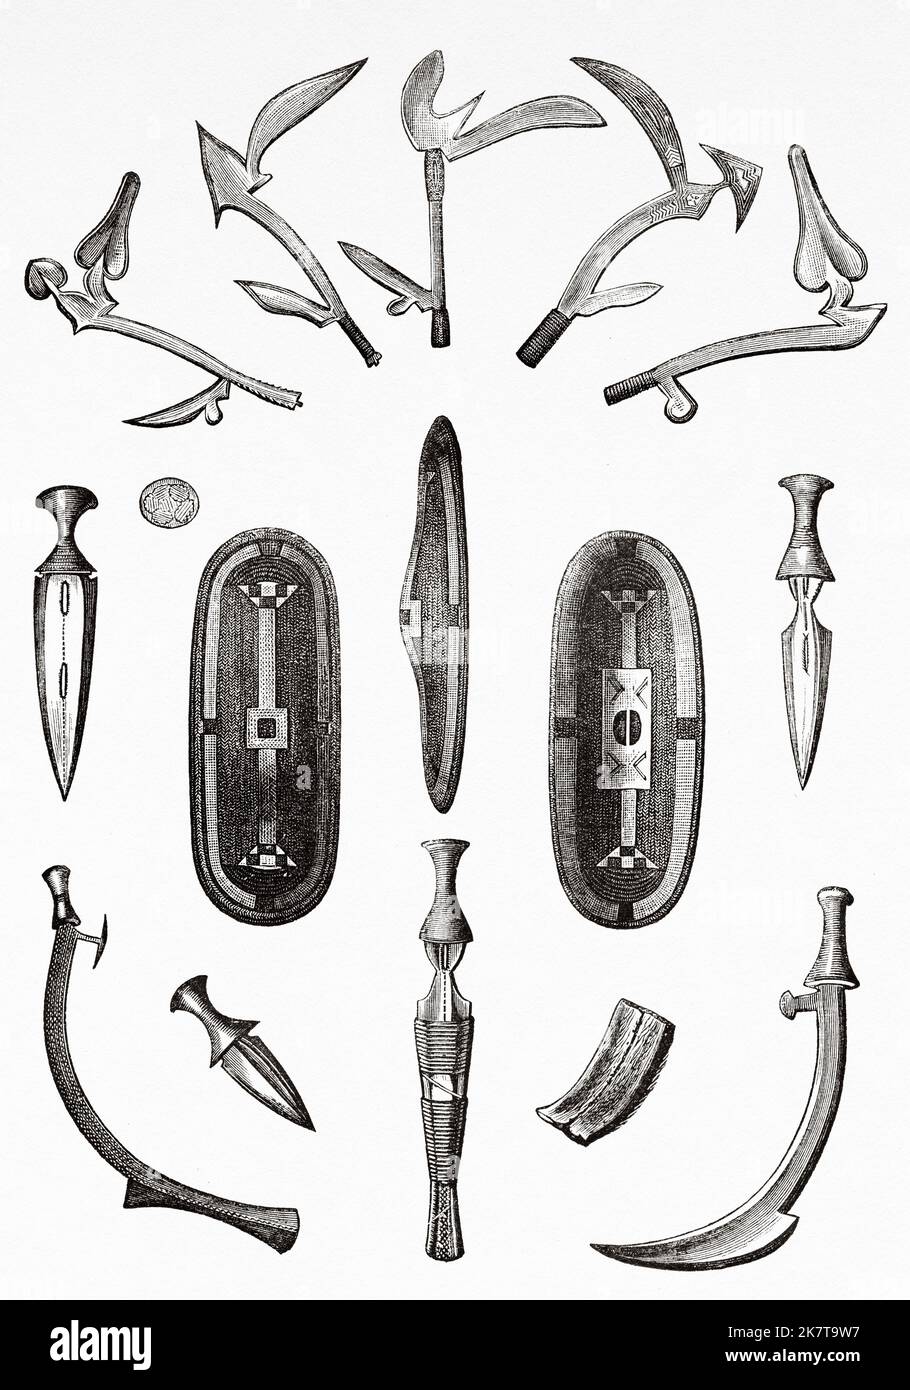 Weapons of the Zande warriors. Troumbaches, knives, sabers and shields, Democratic Republic of the Congo. Africa. Heart of Africa Three years travels and adventures in the unexplored regions of Central Africa by Georg August Schweinfurth, 1868-1871 Stock Photo